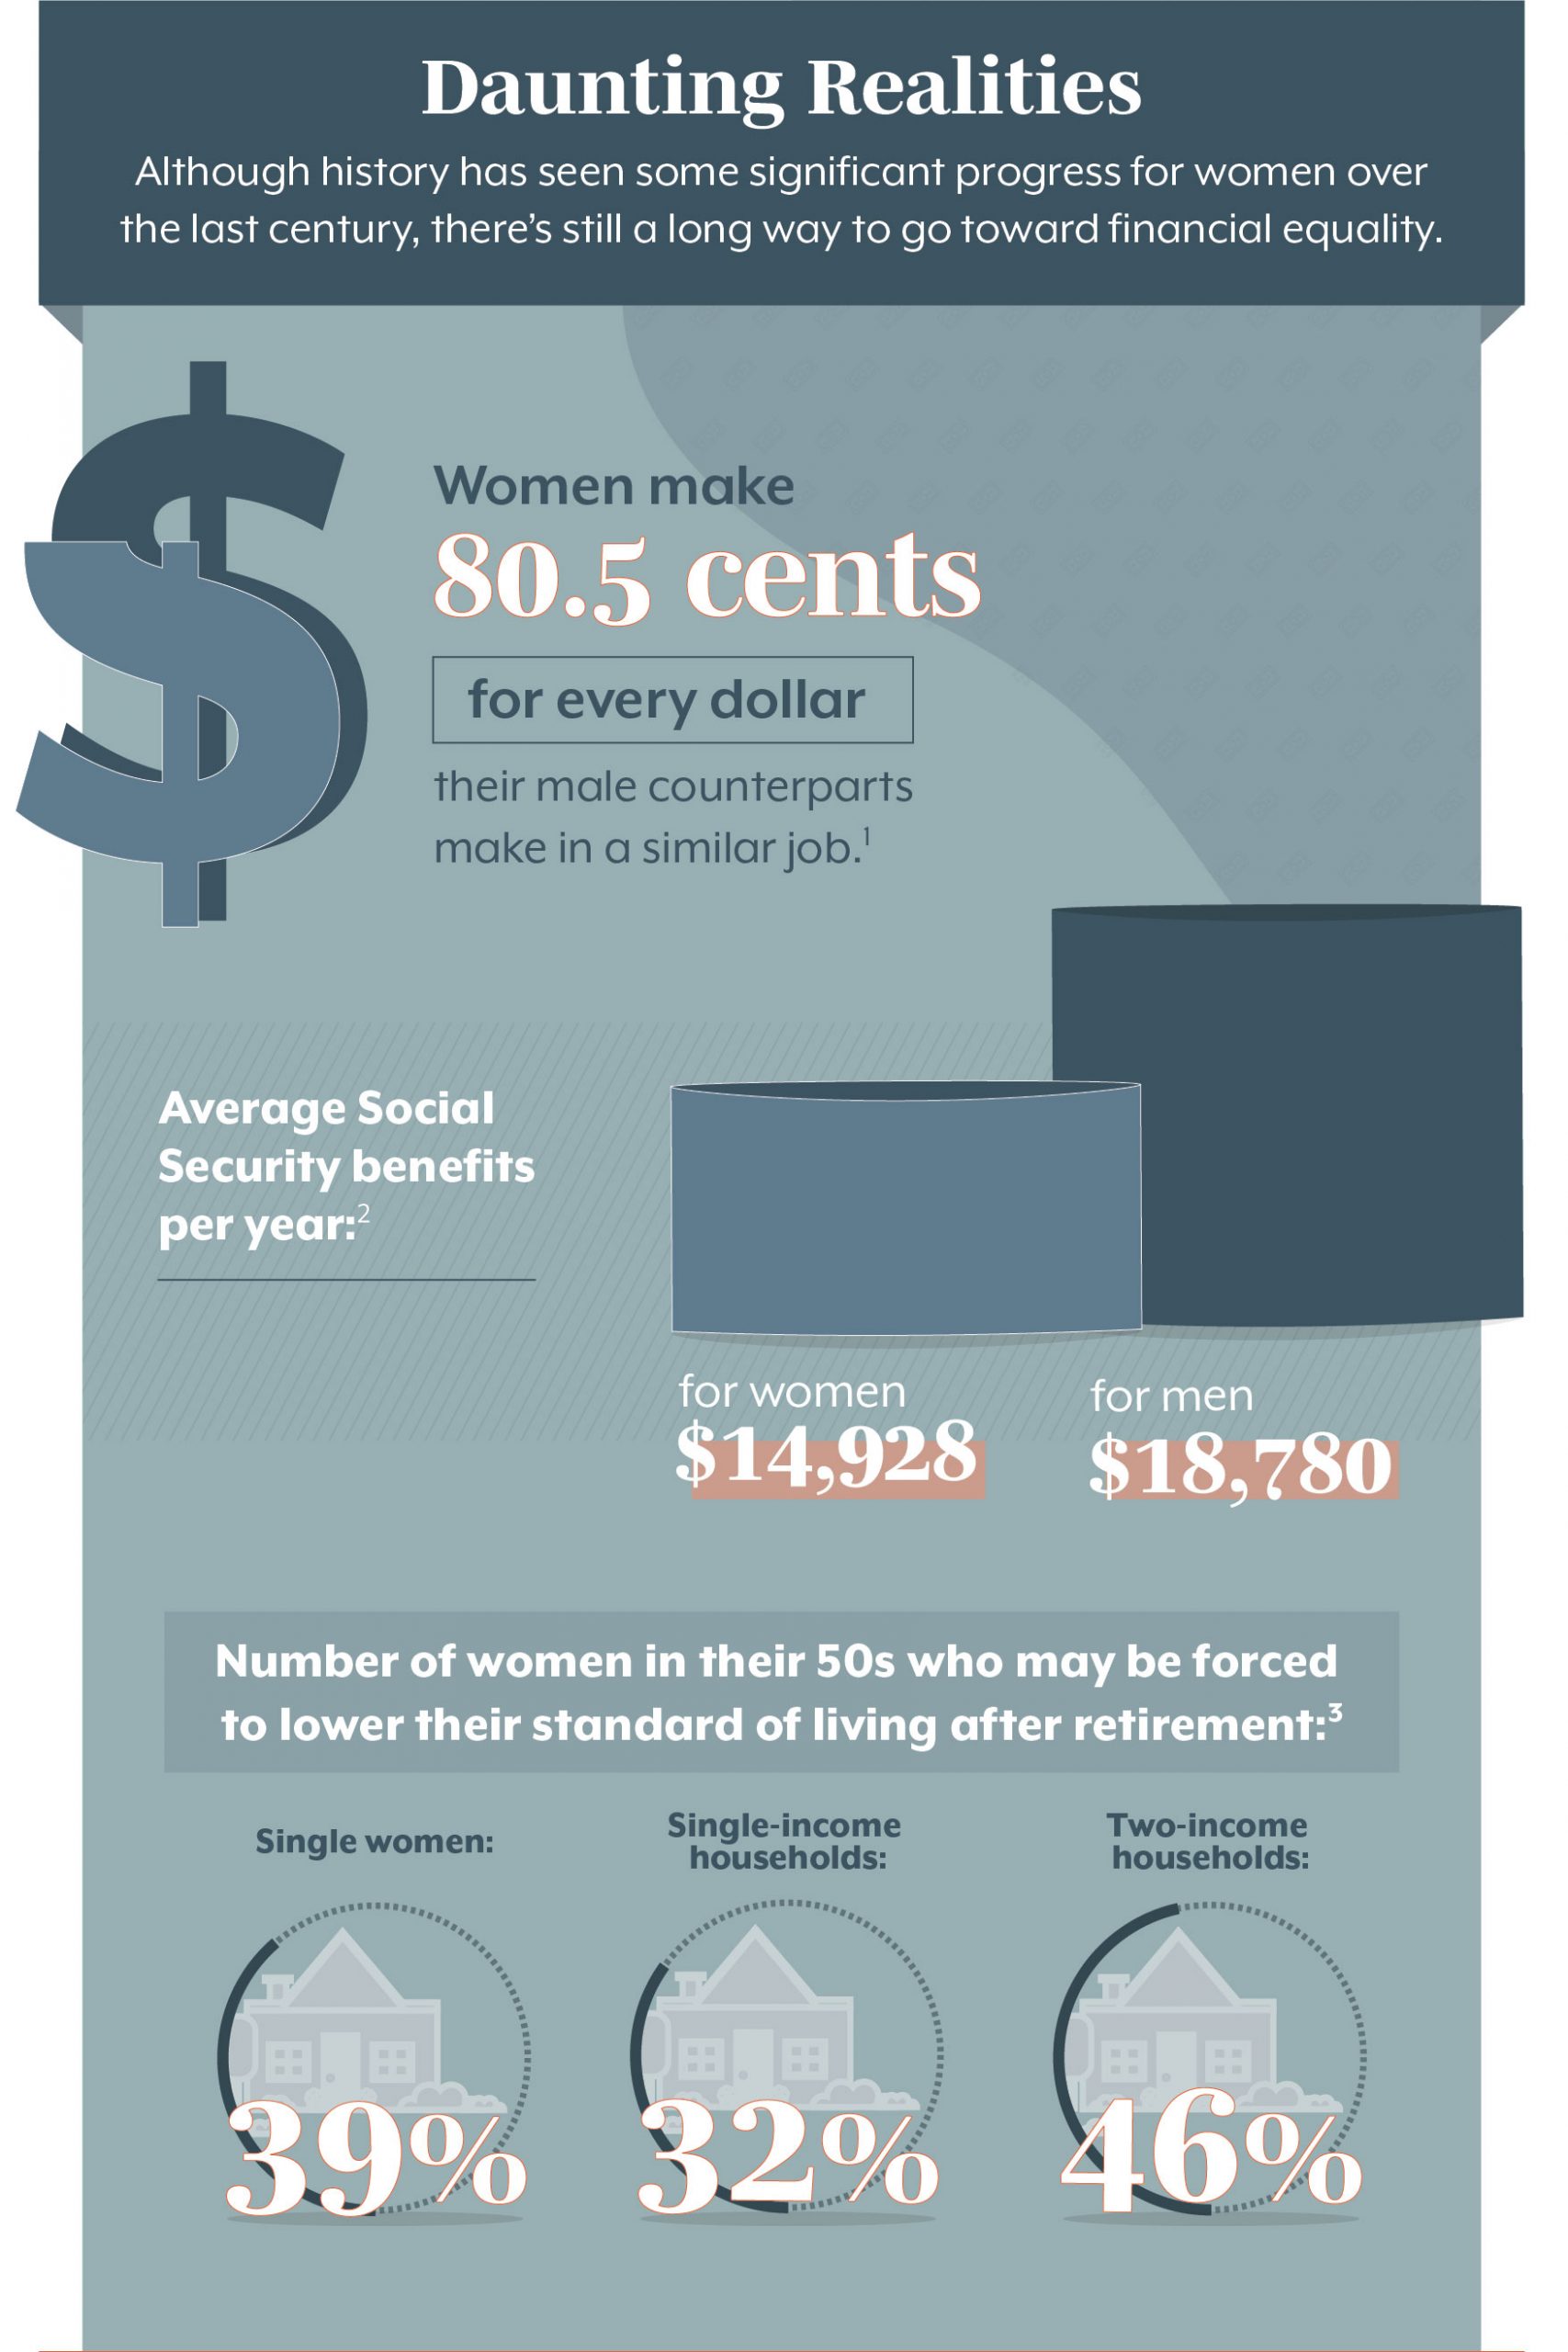 Daunting Realities Although history has seen some significant progress for women over the last century, there’s still a long way to go toward financial equality. Women make 80.5 cents for every dollar their male counterparts make in a similar job. (1) The average Social Security retired worker benefit for women is $14,928 per year, compared with $18,780 for men. (2) 46% of married women in their 50s in two-income households are at risk of being unable to maintain their standard of living in retirement. 32% of married women in their 50s in one-income households are at risk of being unable to maintain their standard of living in retirement. 39% of single women in their 50s are at risk of being unable to maintain their standard of living in retirement. (3)